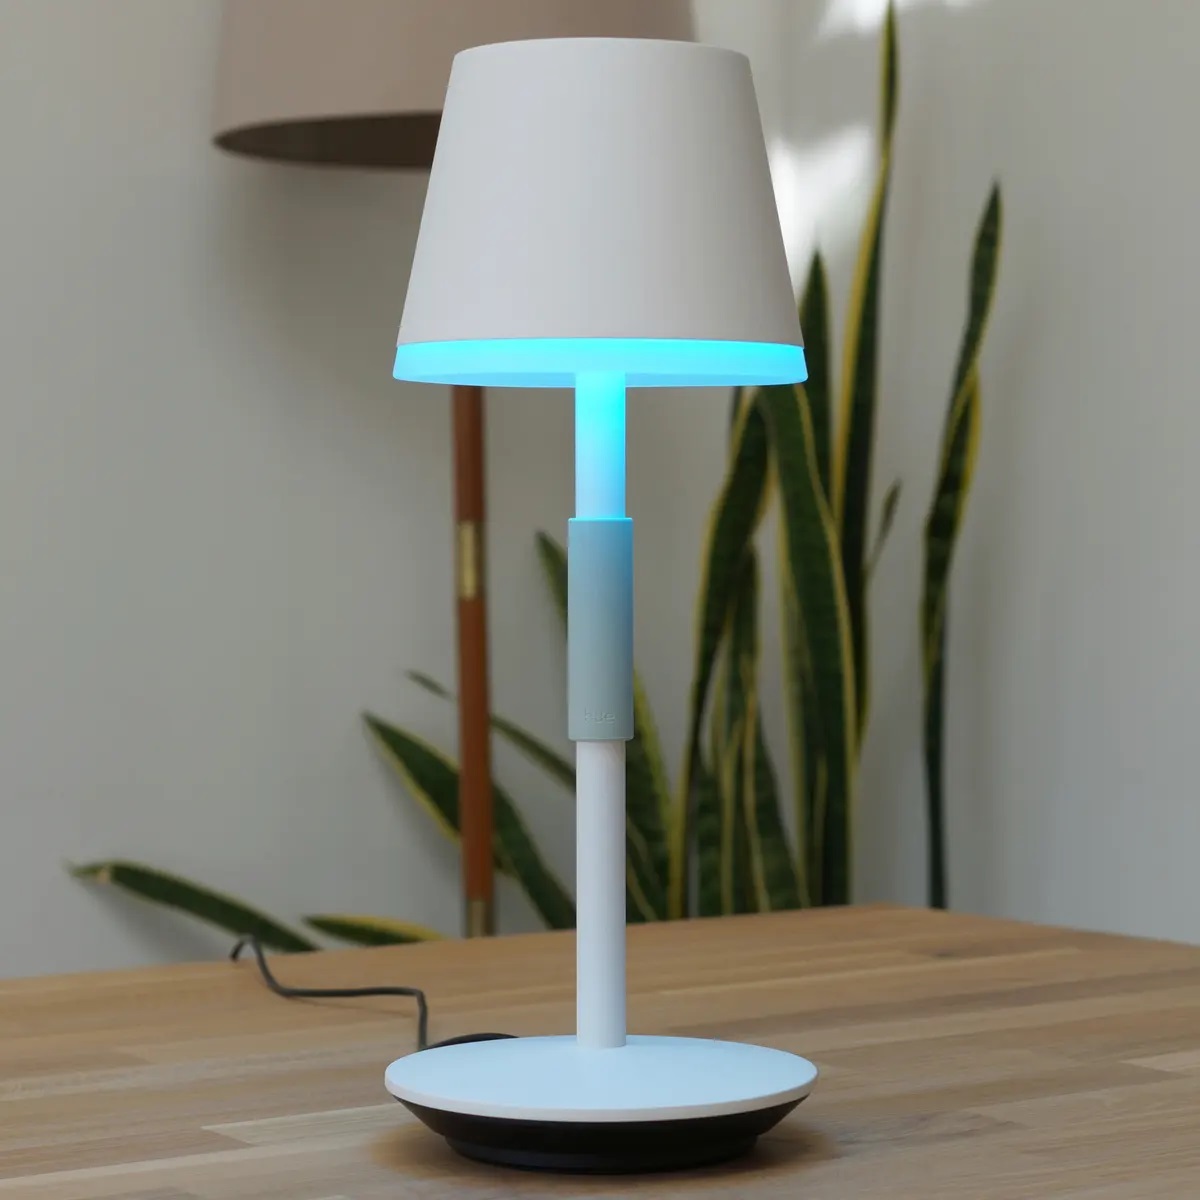 LUSHARBOR Battery Operated Table Lamp with Timer, Cordless Table Lamps with  Led Bulb, Battery Powere…See more LUSHARBOR Battery Operated Table Lamp